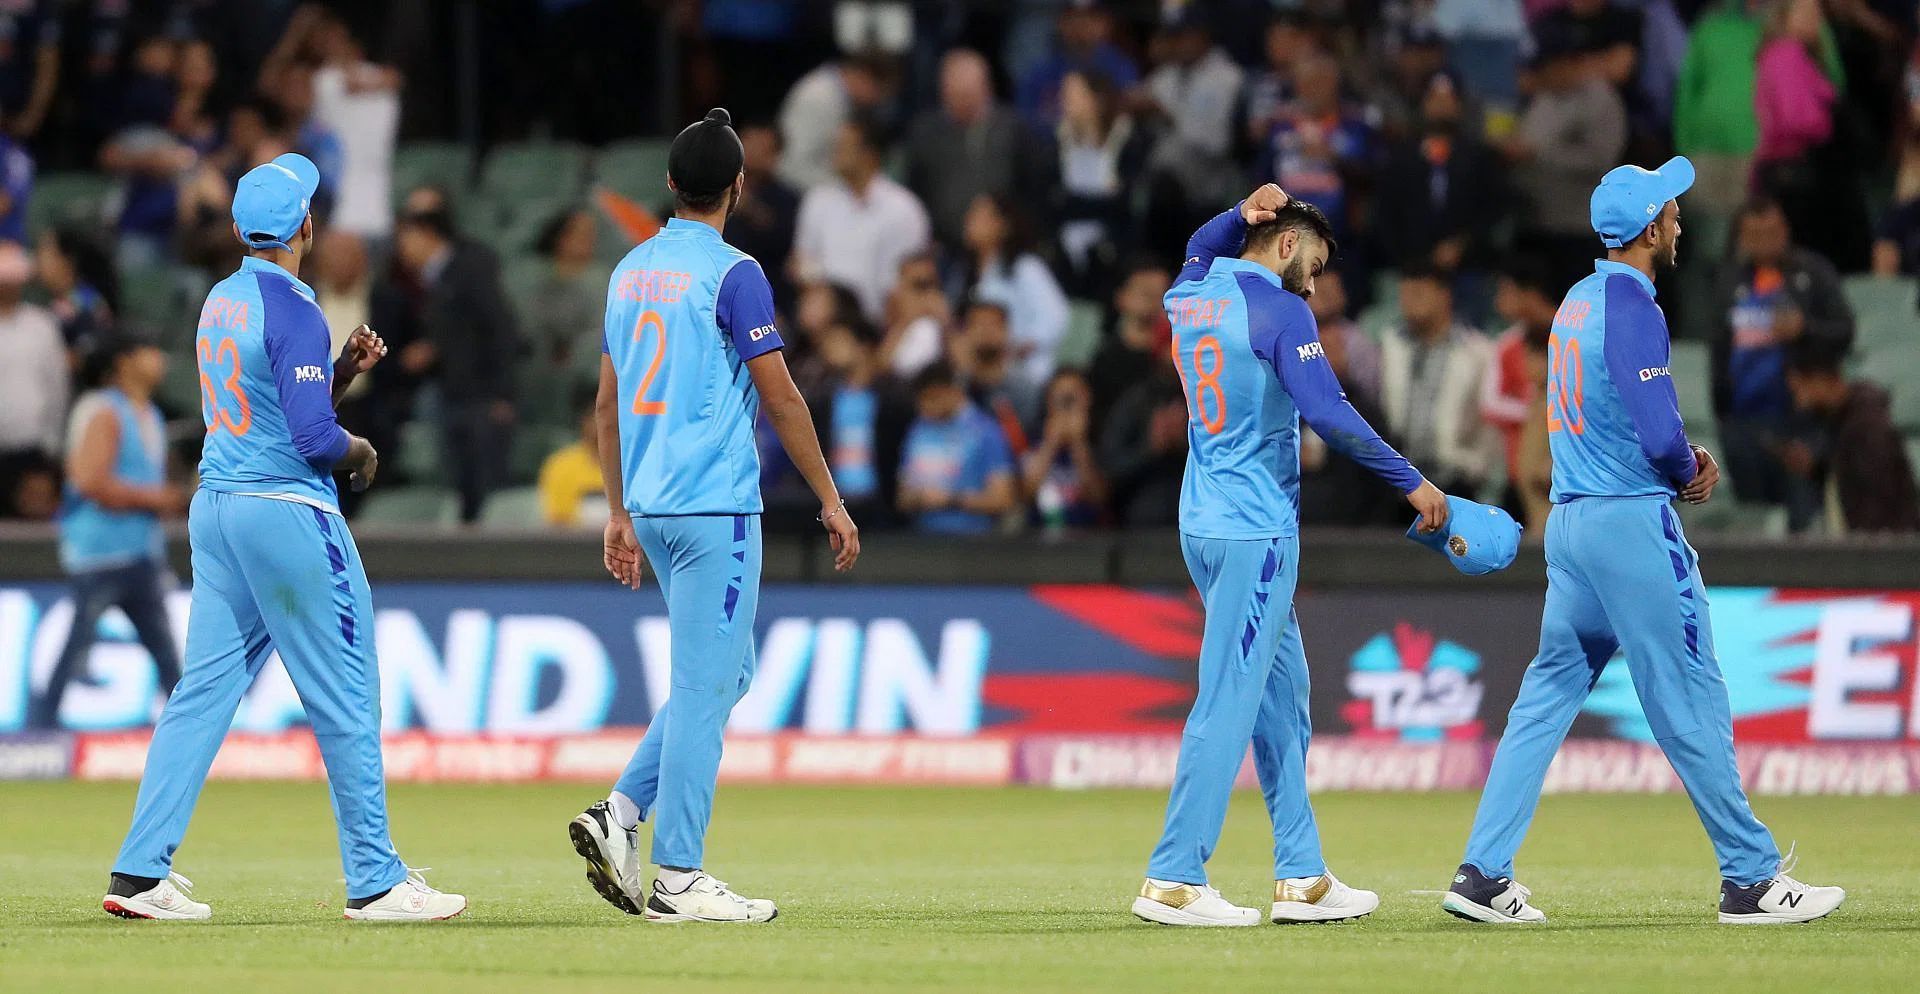 Team India&rsquo;s bowlers were completely listless in their semi-final against England as Alex Hales (86* off 47) and Jos Buttler (80* off 49) went on the rampage. Their record 170-run unbeaten stand knocked India out of the World Cup. Pic: Getty Images